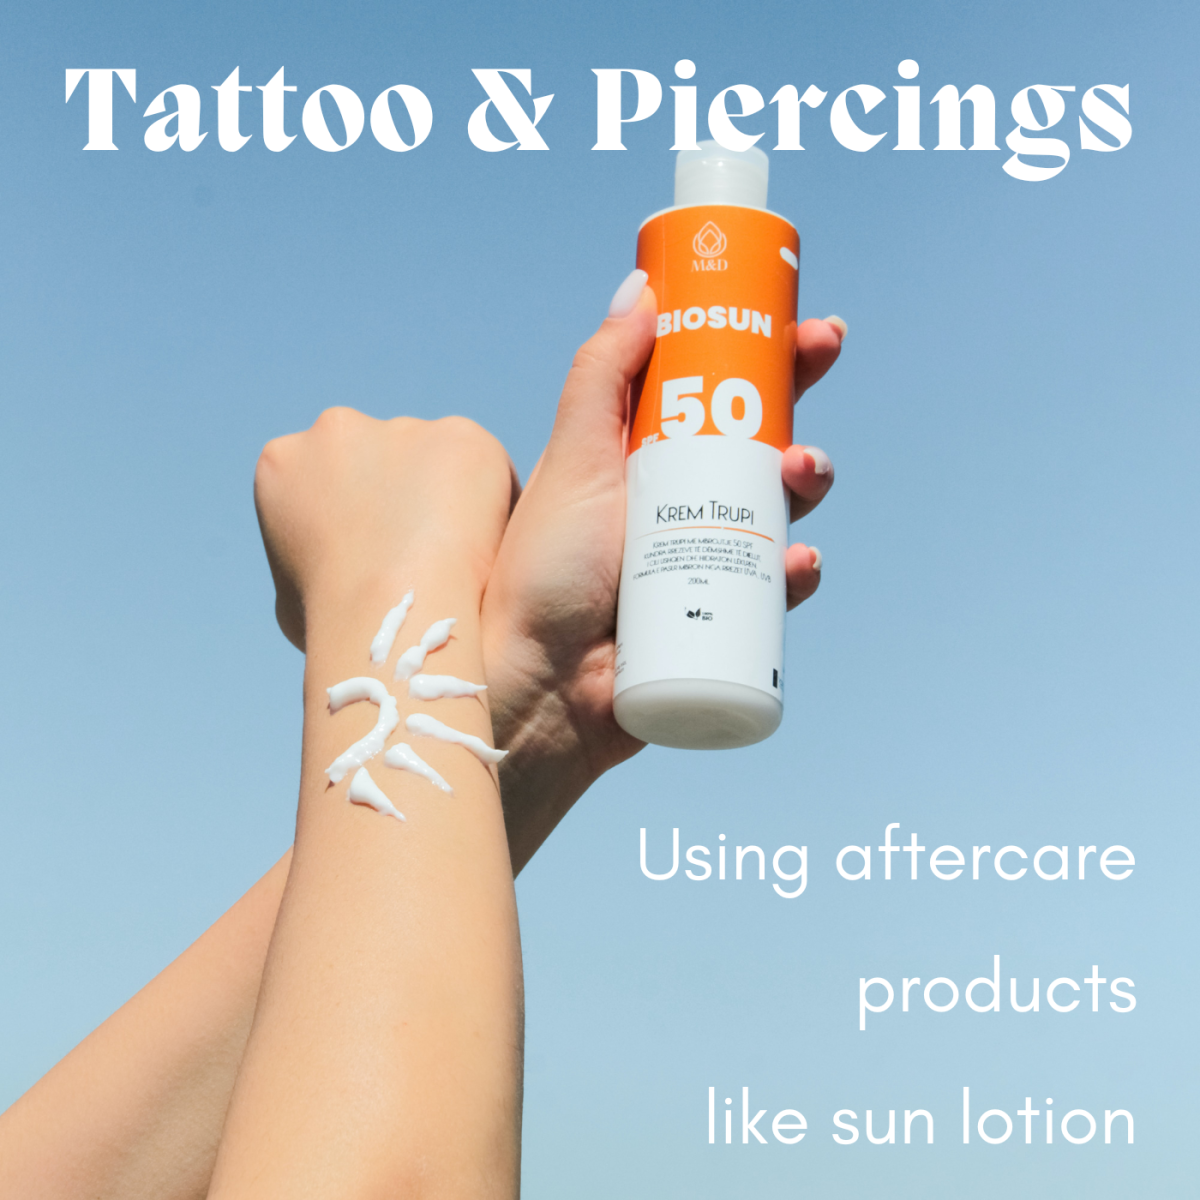 Bad Aftercare Advice: The Truth About Tattoo & Piercing Products